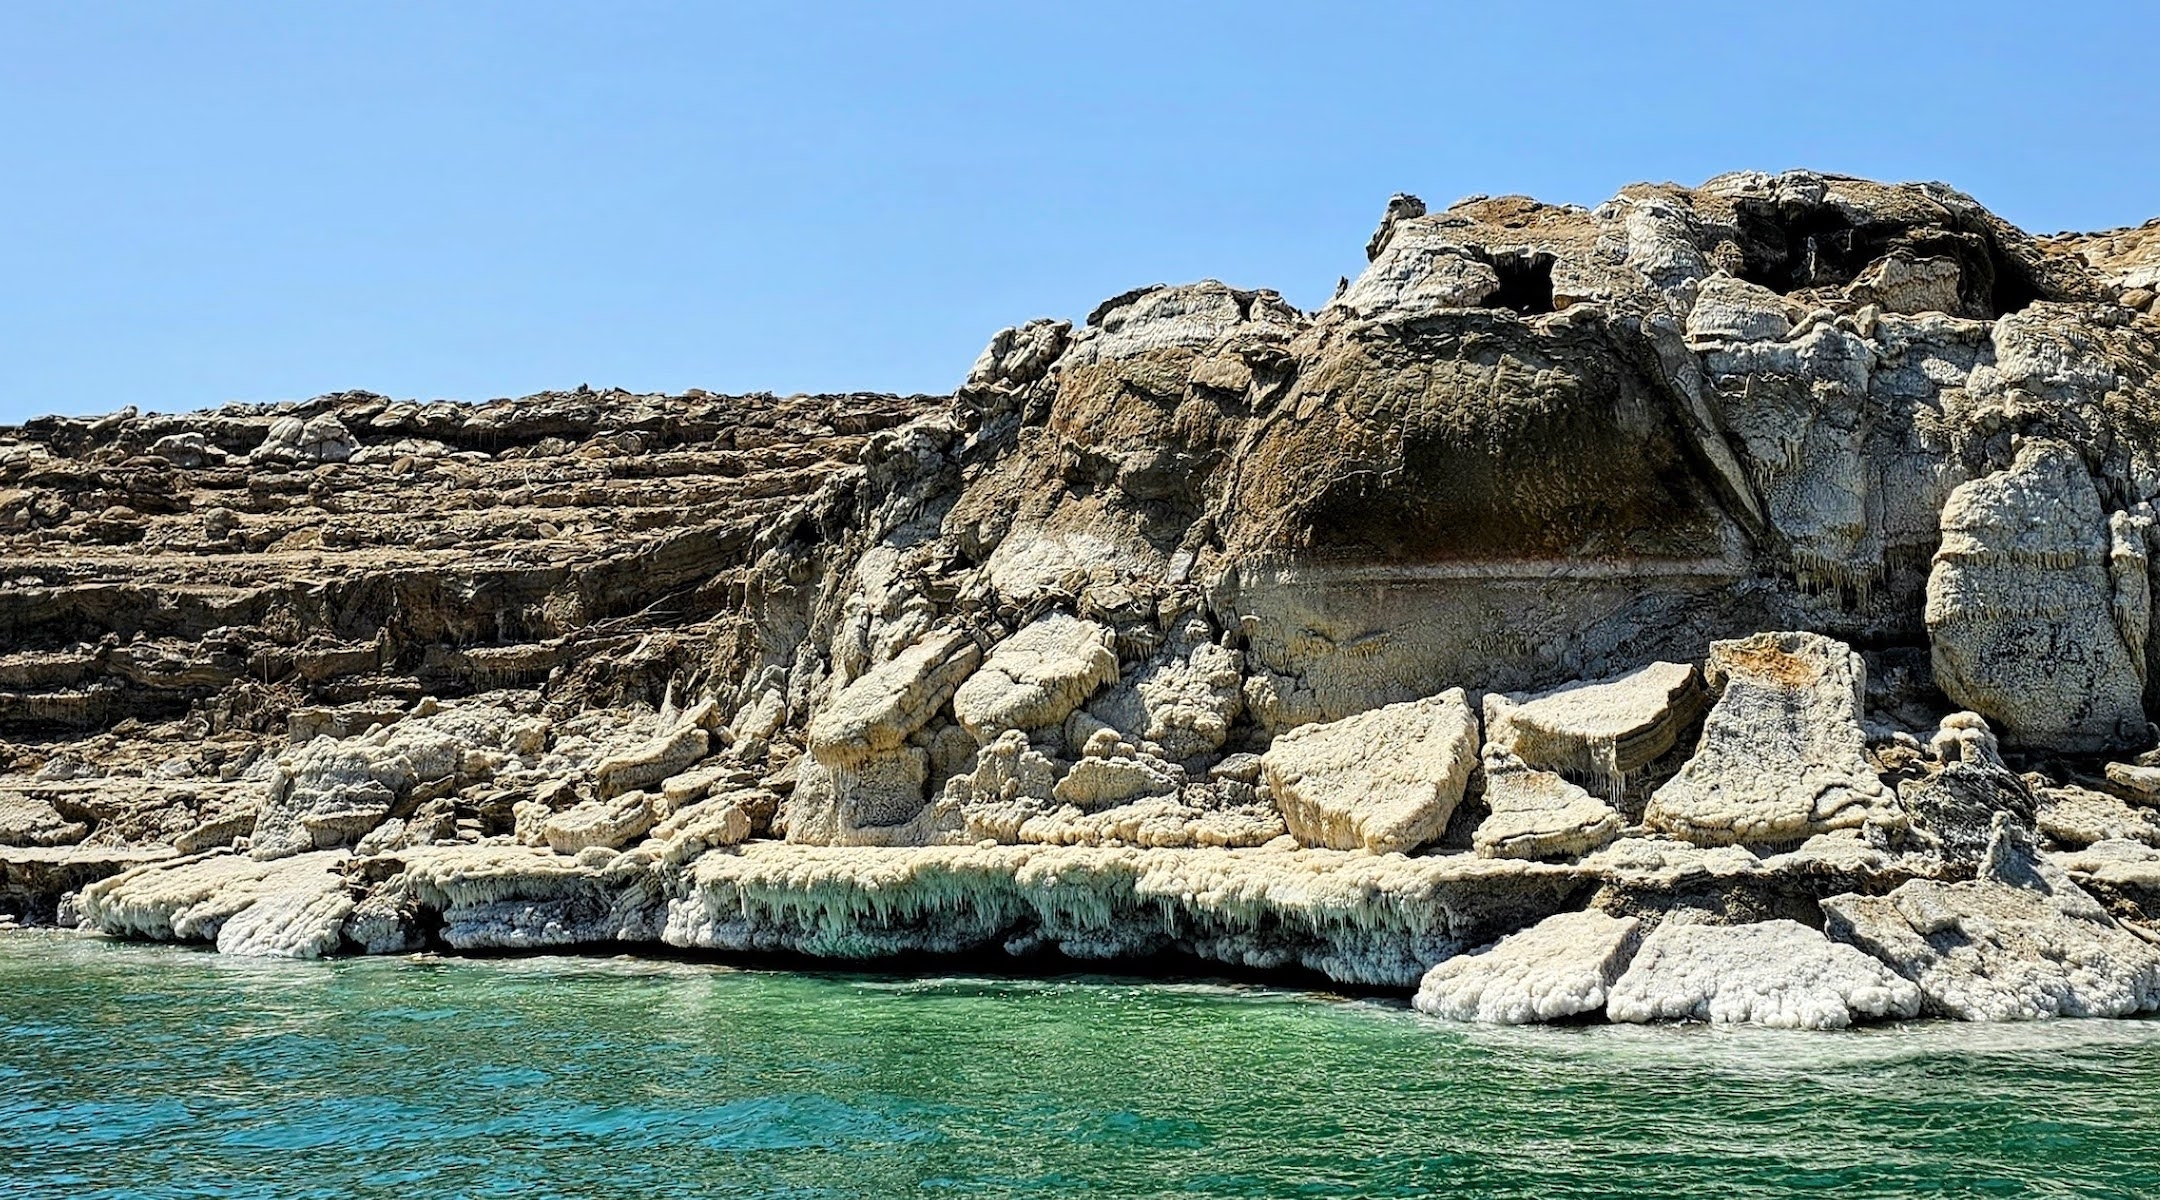 The receding waters of the Dead Sea have revealed new rock formations. (Noam Bedein)